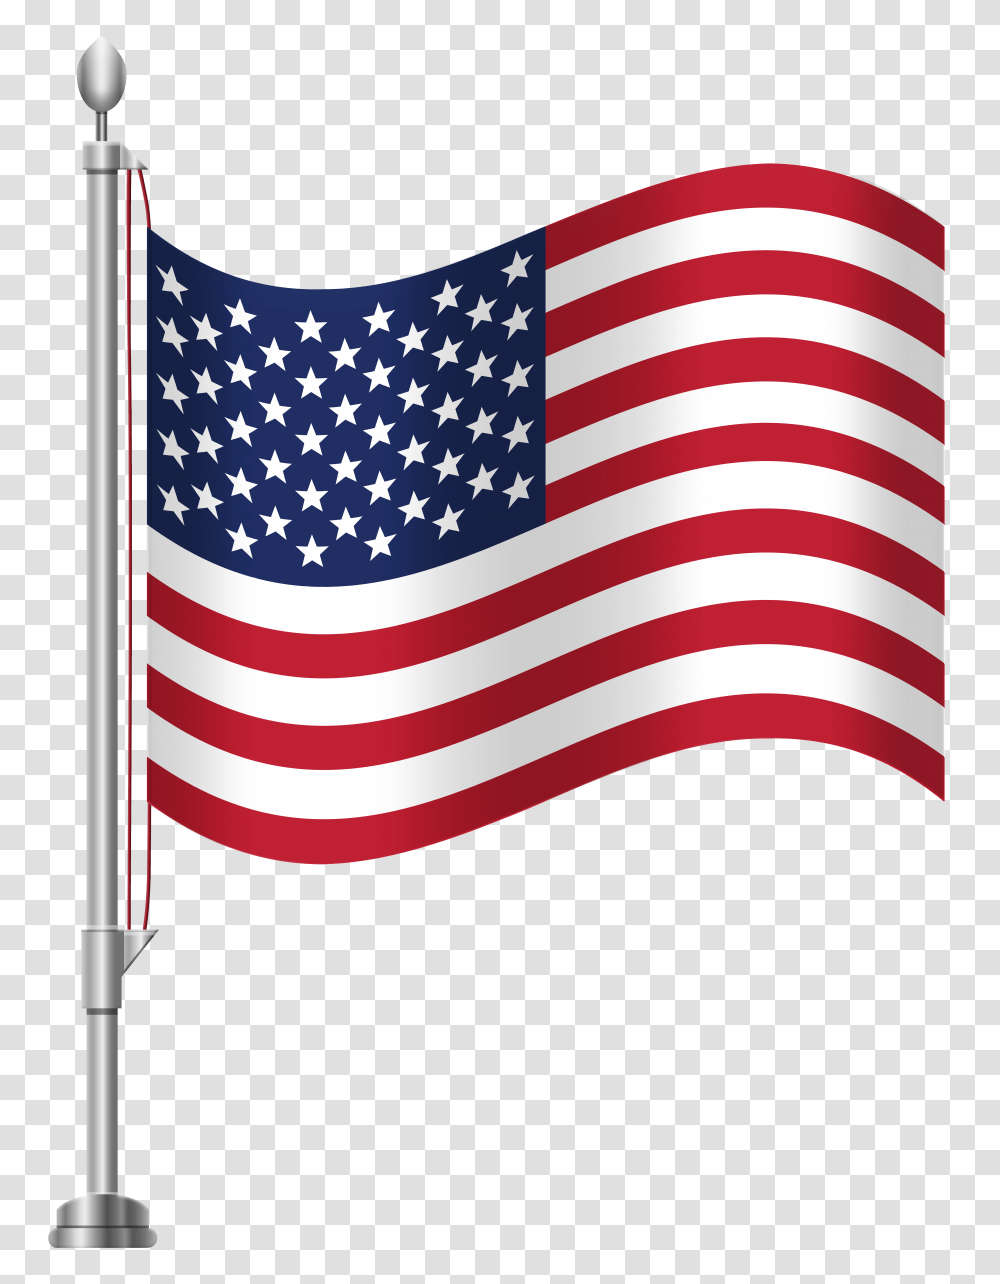 United States Of America Flag Clip Art, American Flag Transparent Png